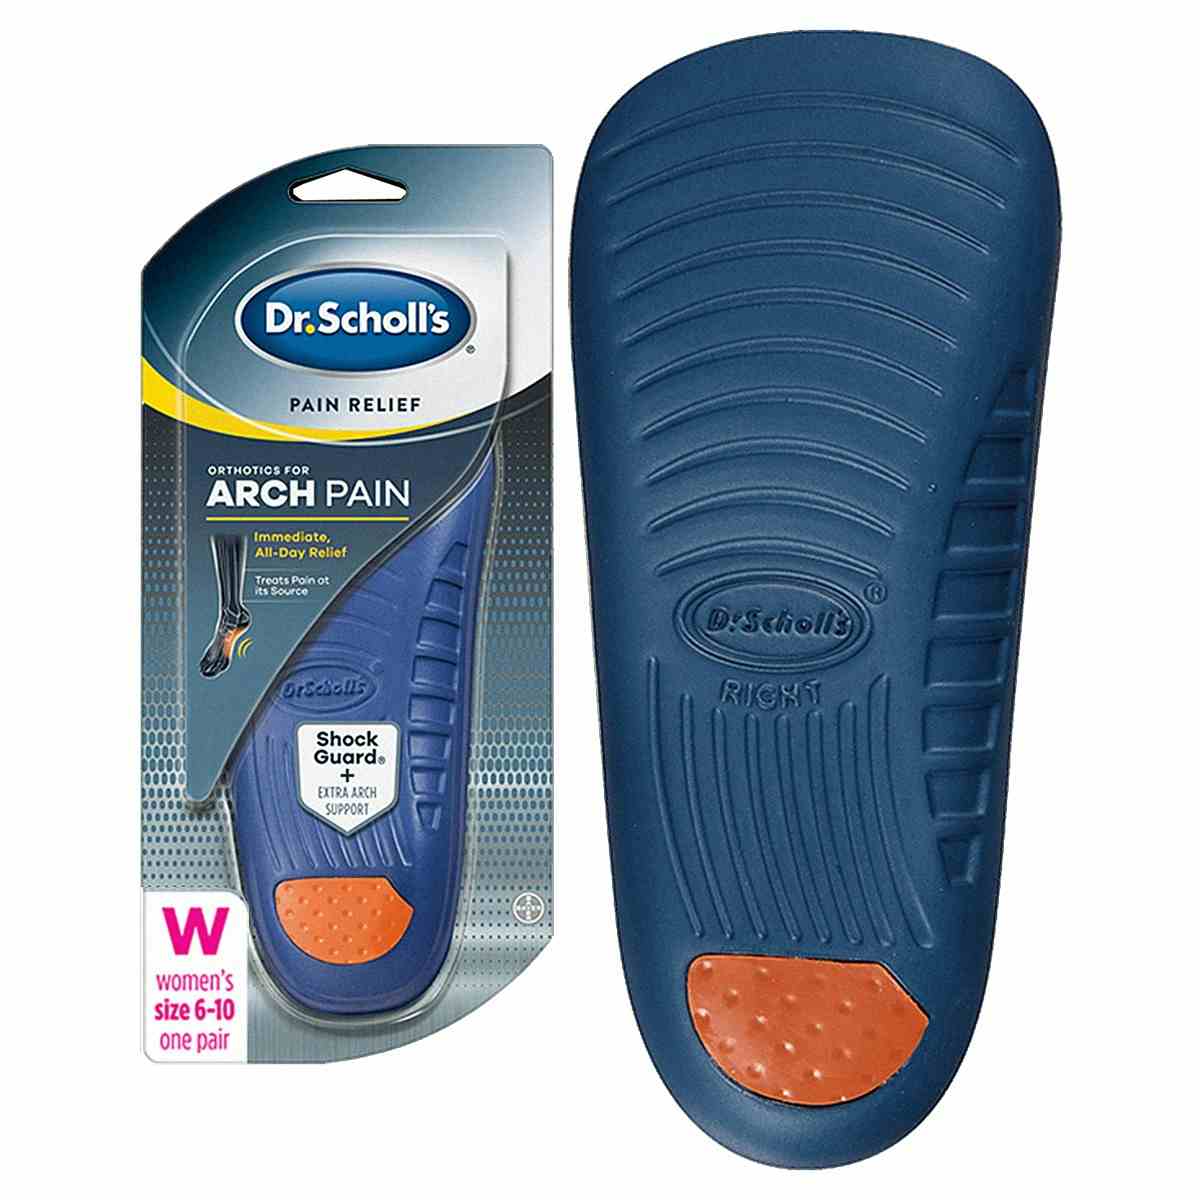 Dr. Scholl's Pain Relief Orthotics for Arch Pain, 85279157, Women's (Size 6-10) - Pack of 2